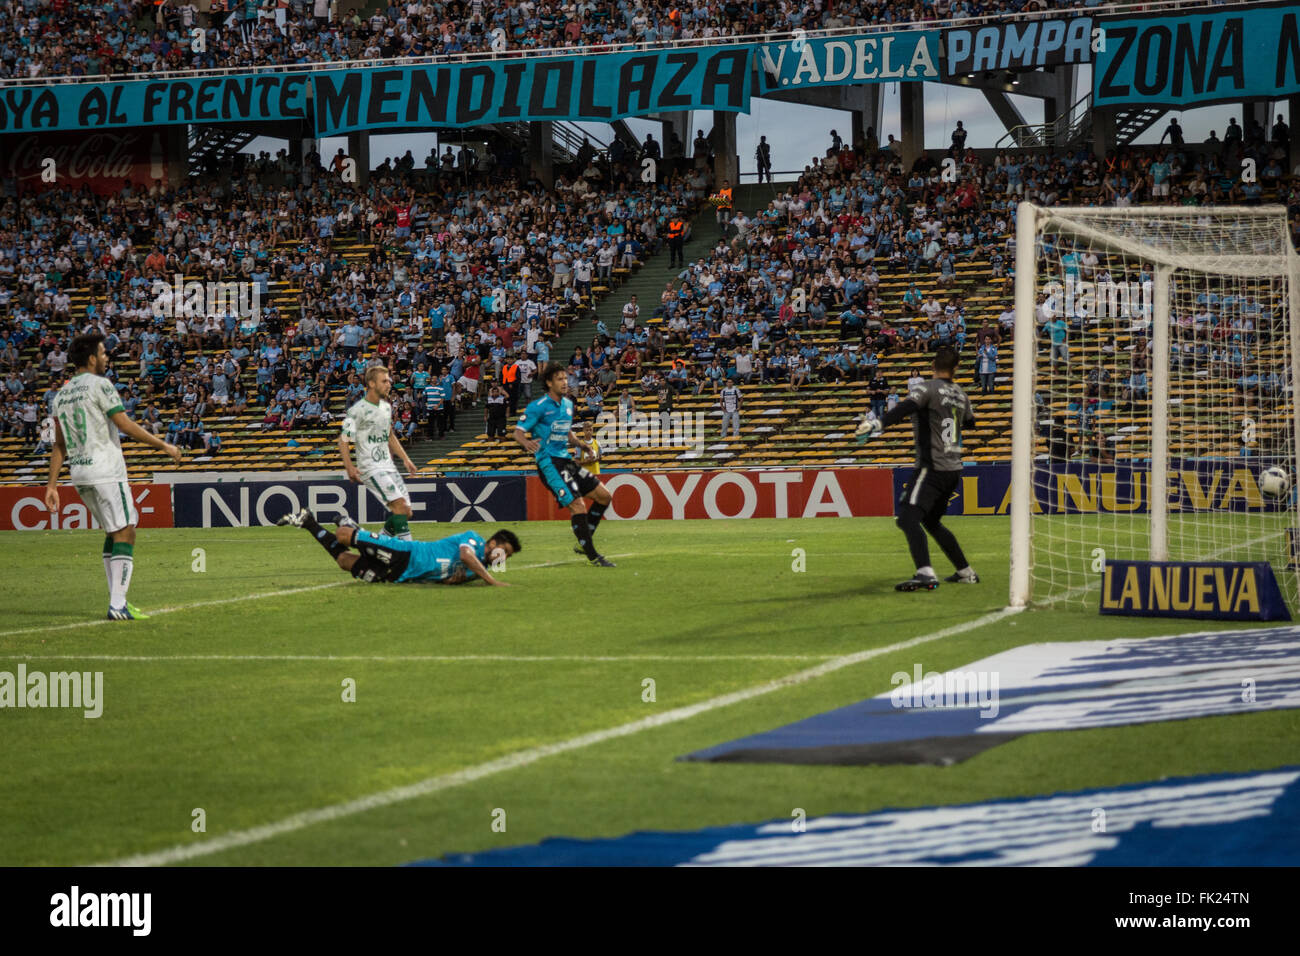 Cordoba, Argentina. 5th March, 2016. Pier Barrios, Defense de Belgrano scoring a goal during a match between Belgrano and Sarmiento as part of the sixth round of Primera Division. in Mario Kempes Stadium on March 05, 2014 in Cordoba, Argentina. Stock Photo